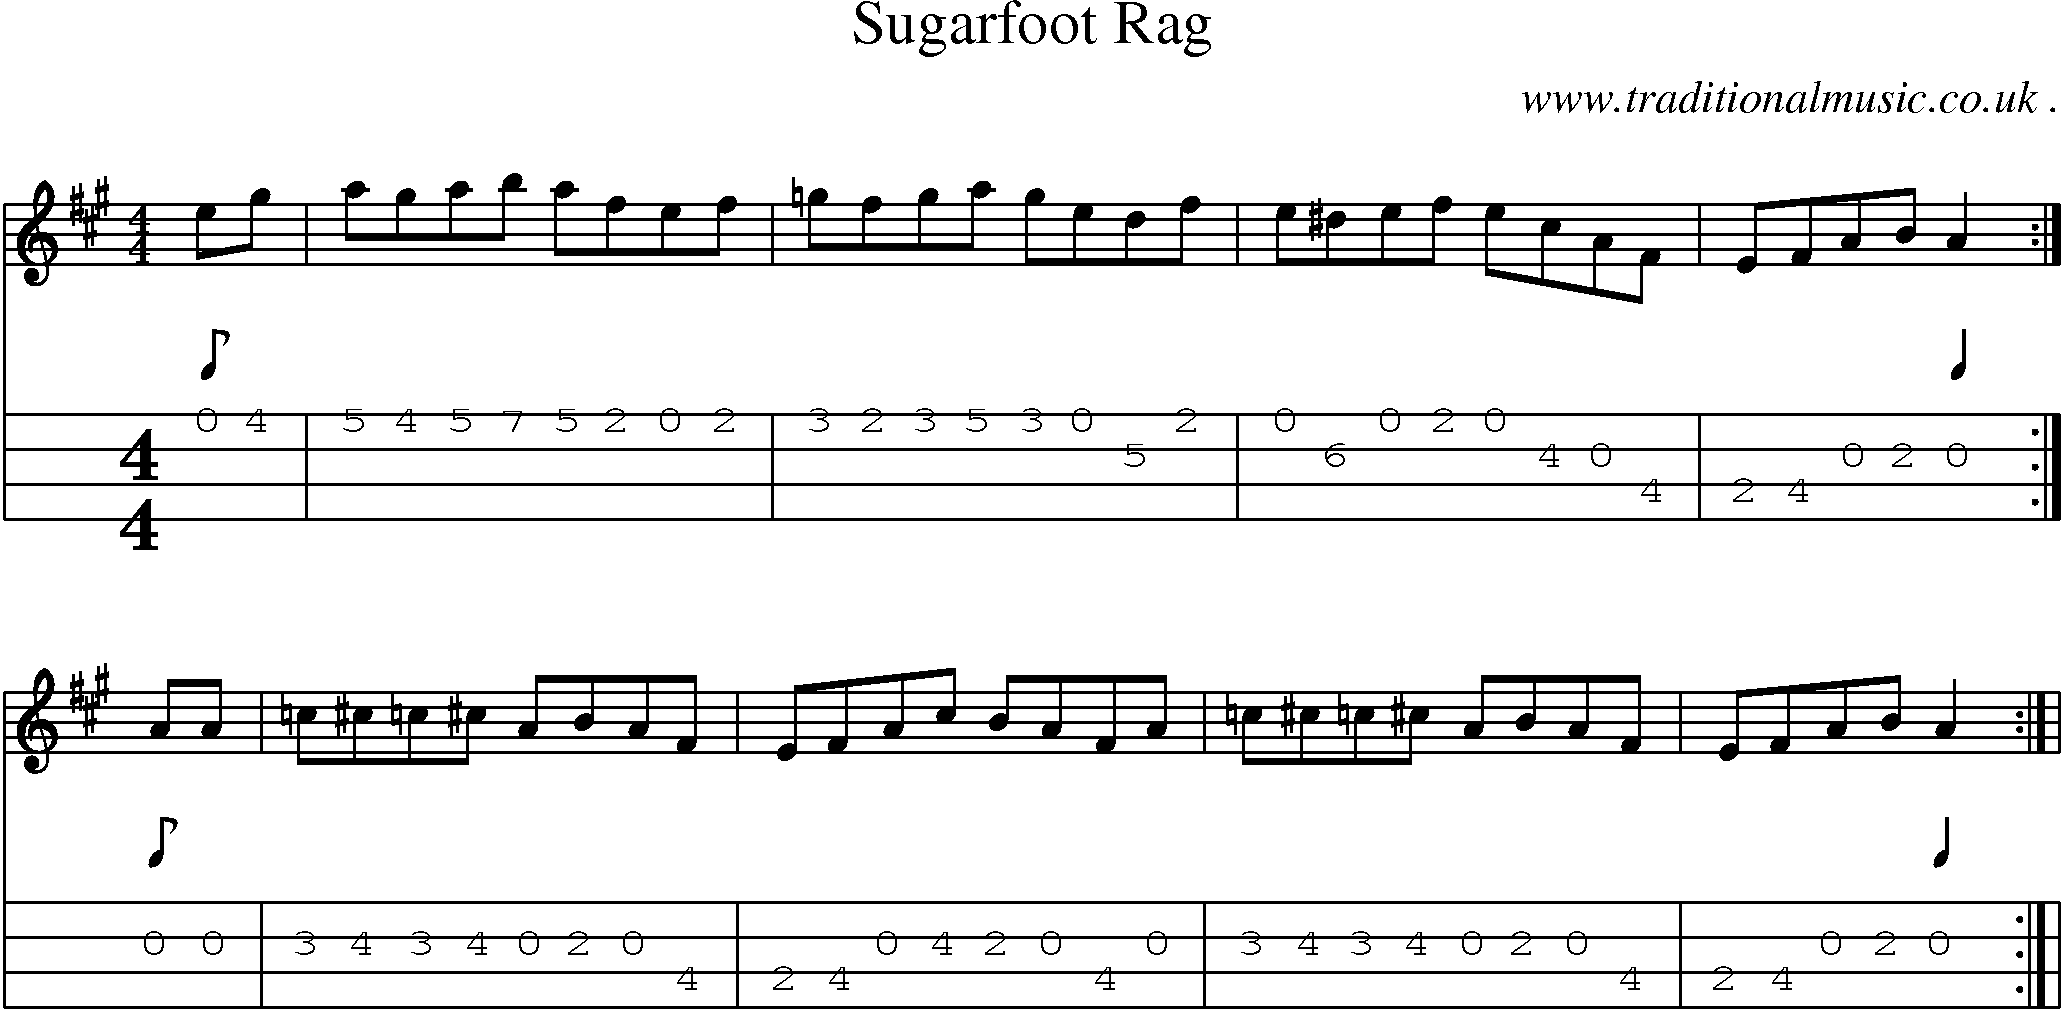 Music Score and Guitar Tabs for Sugarfoot Rag